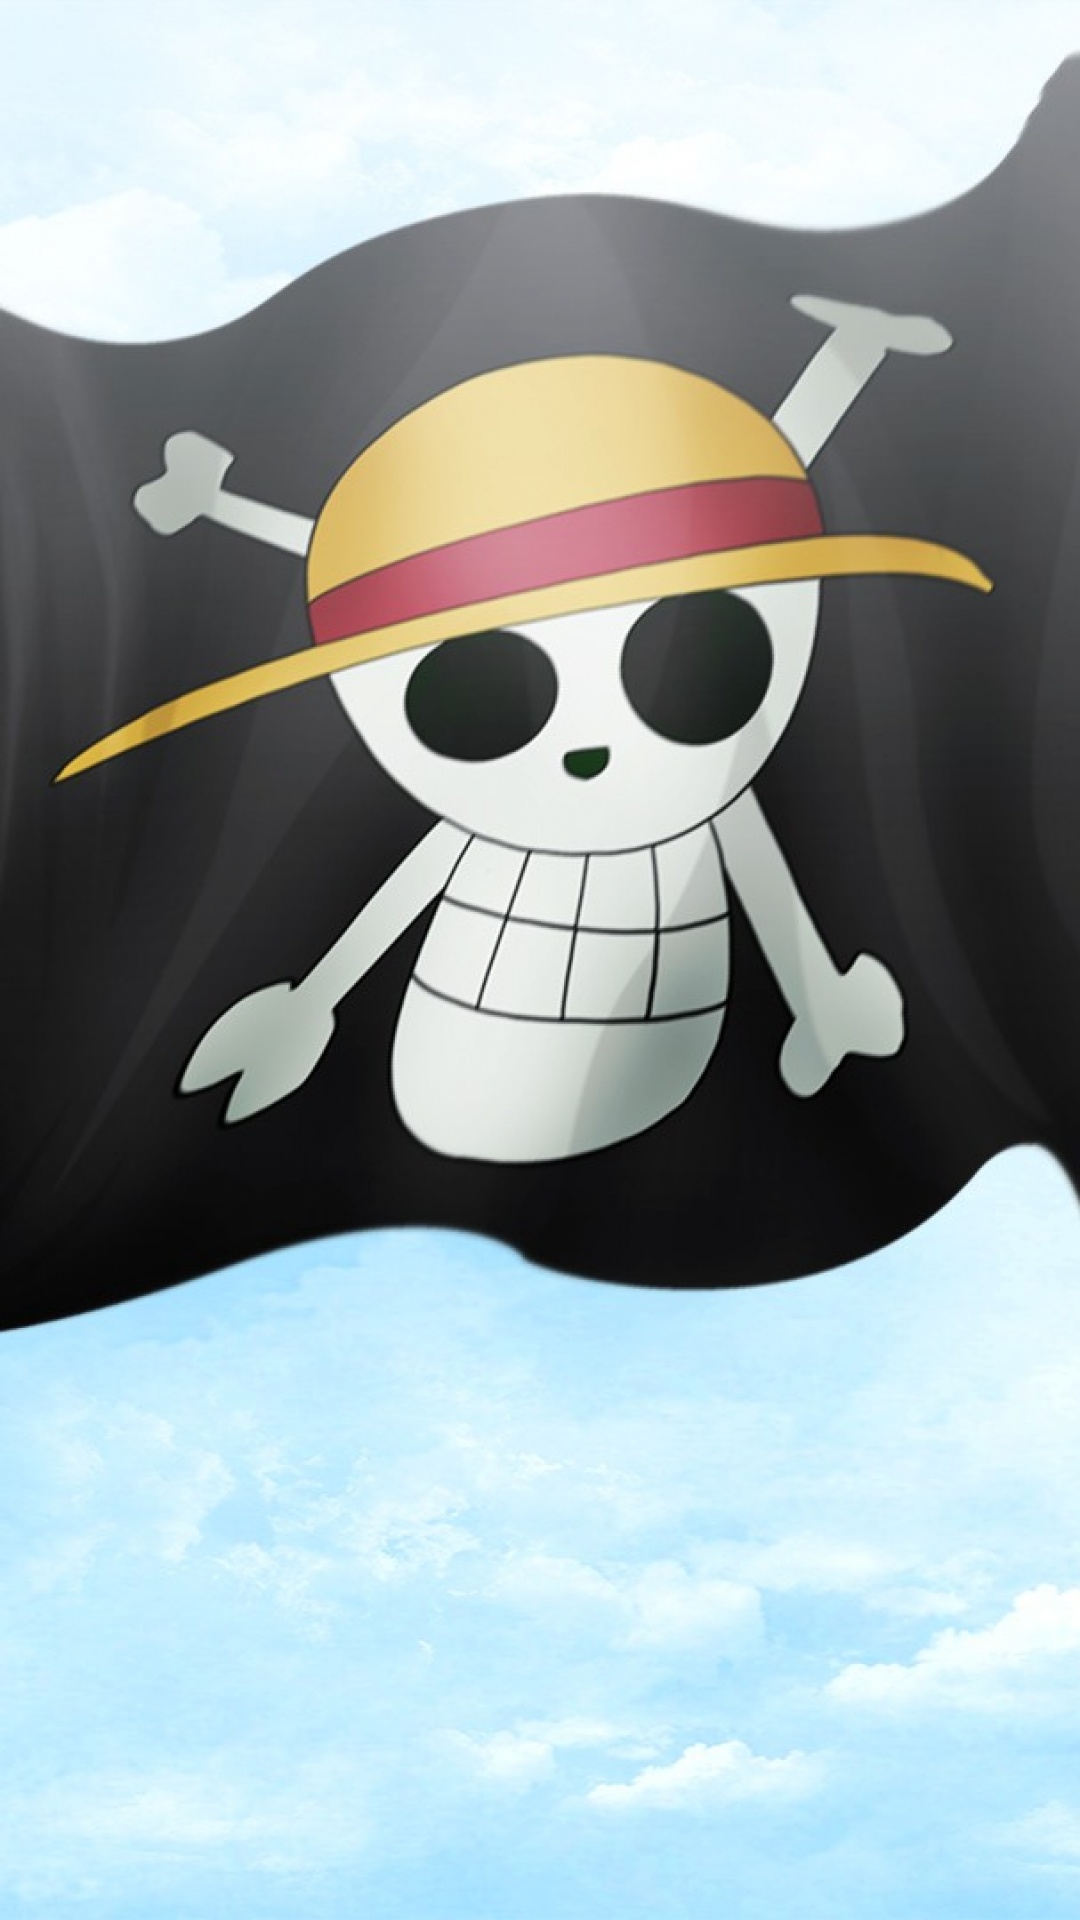 Pirate Flag One Piece Iphone Wallpaper